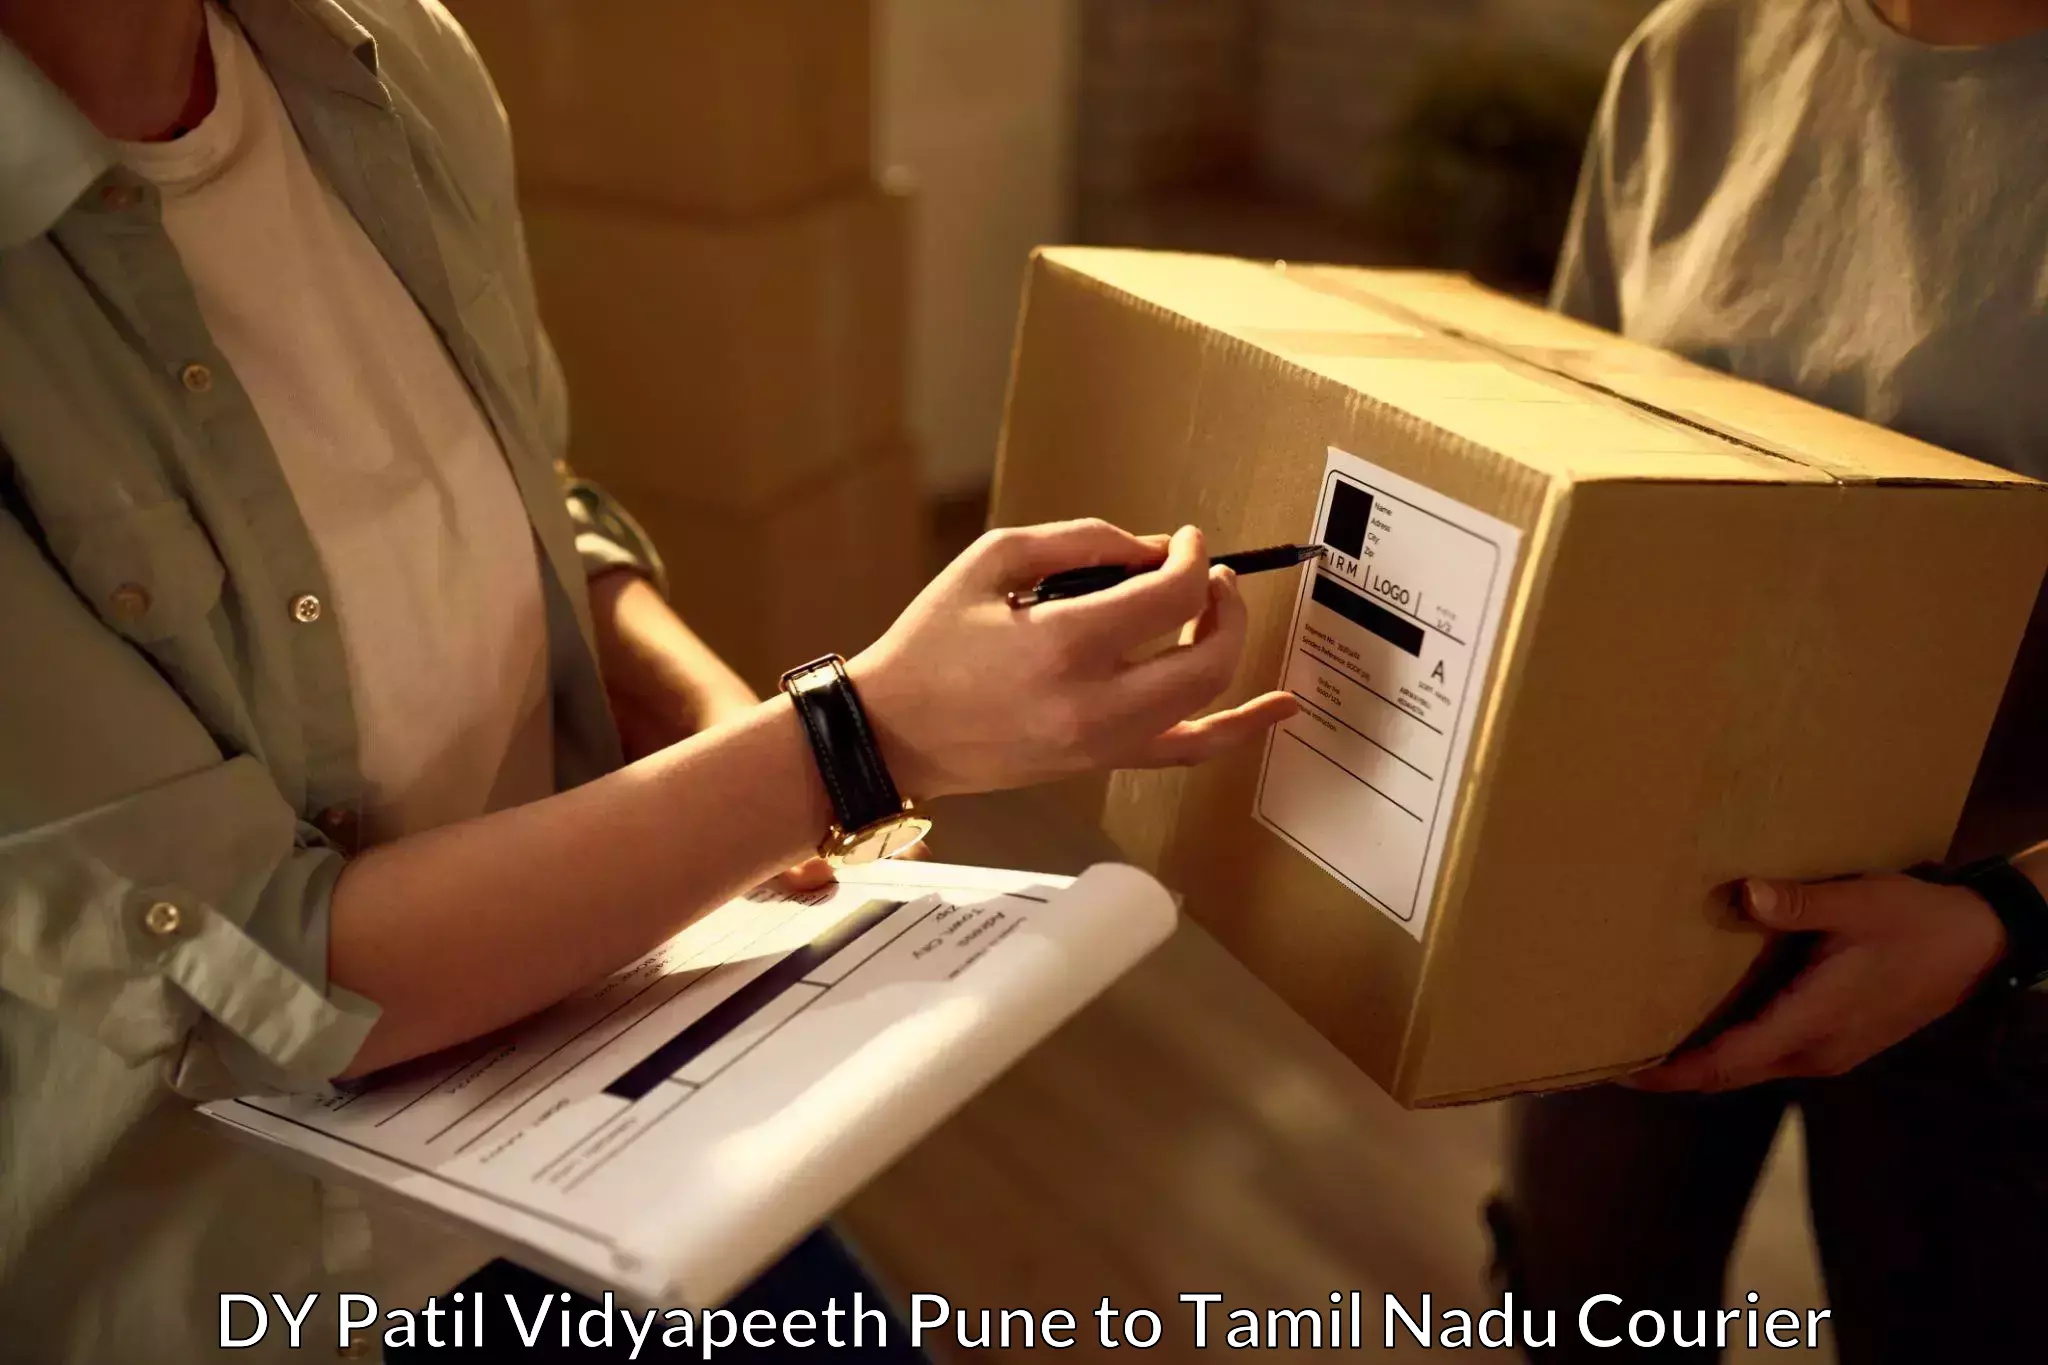 Multi-service courier options DY Patil Vidyapeeth Pune to Chennai Port